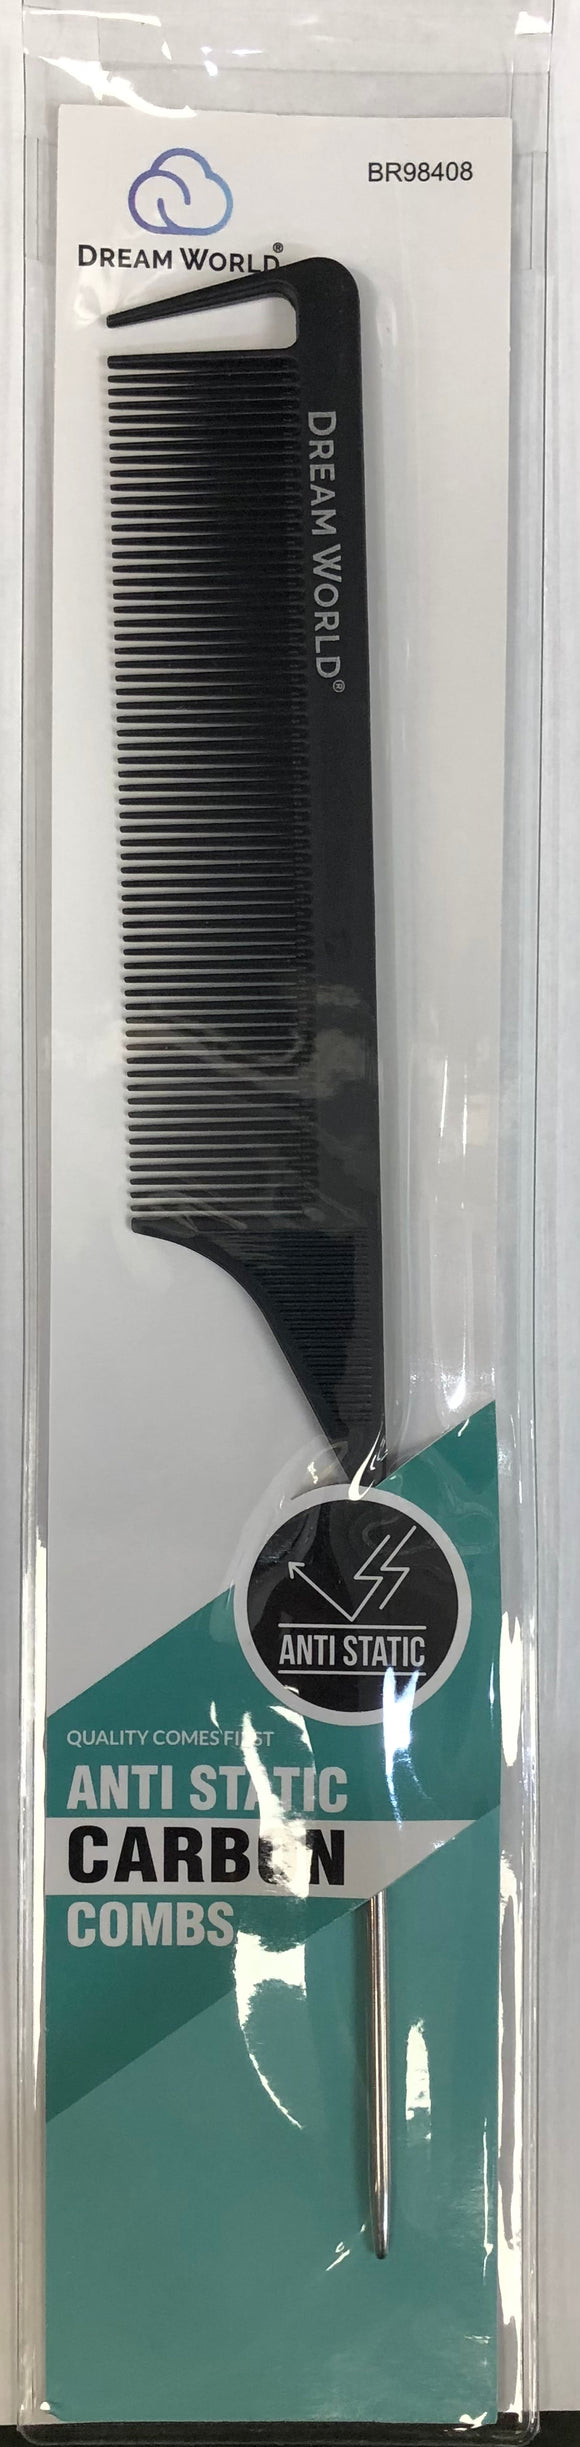 Dream Anti Static Carbon Pin Tail Comb # BR98408